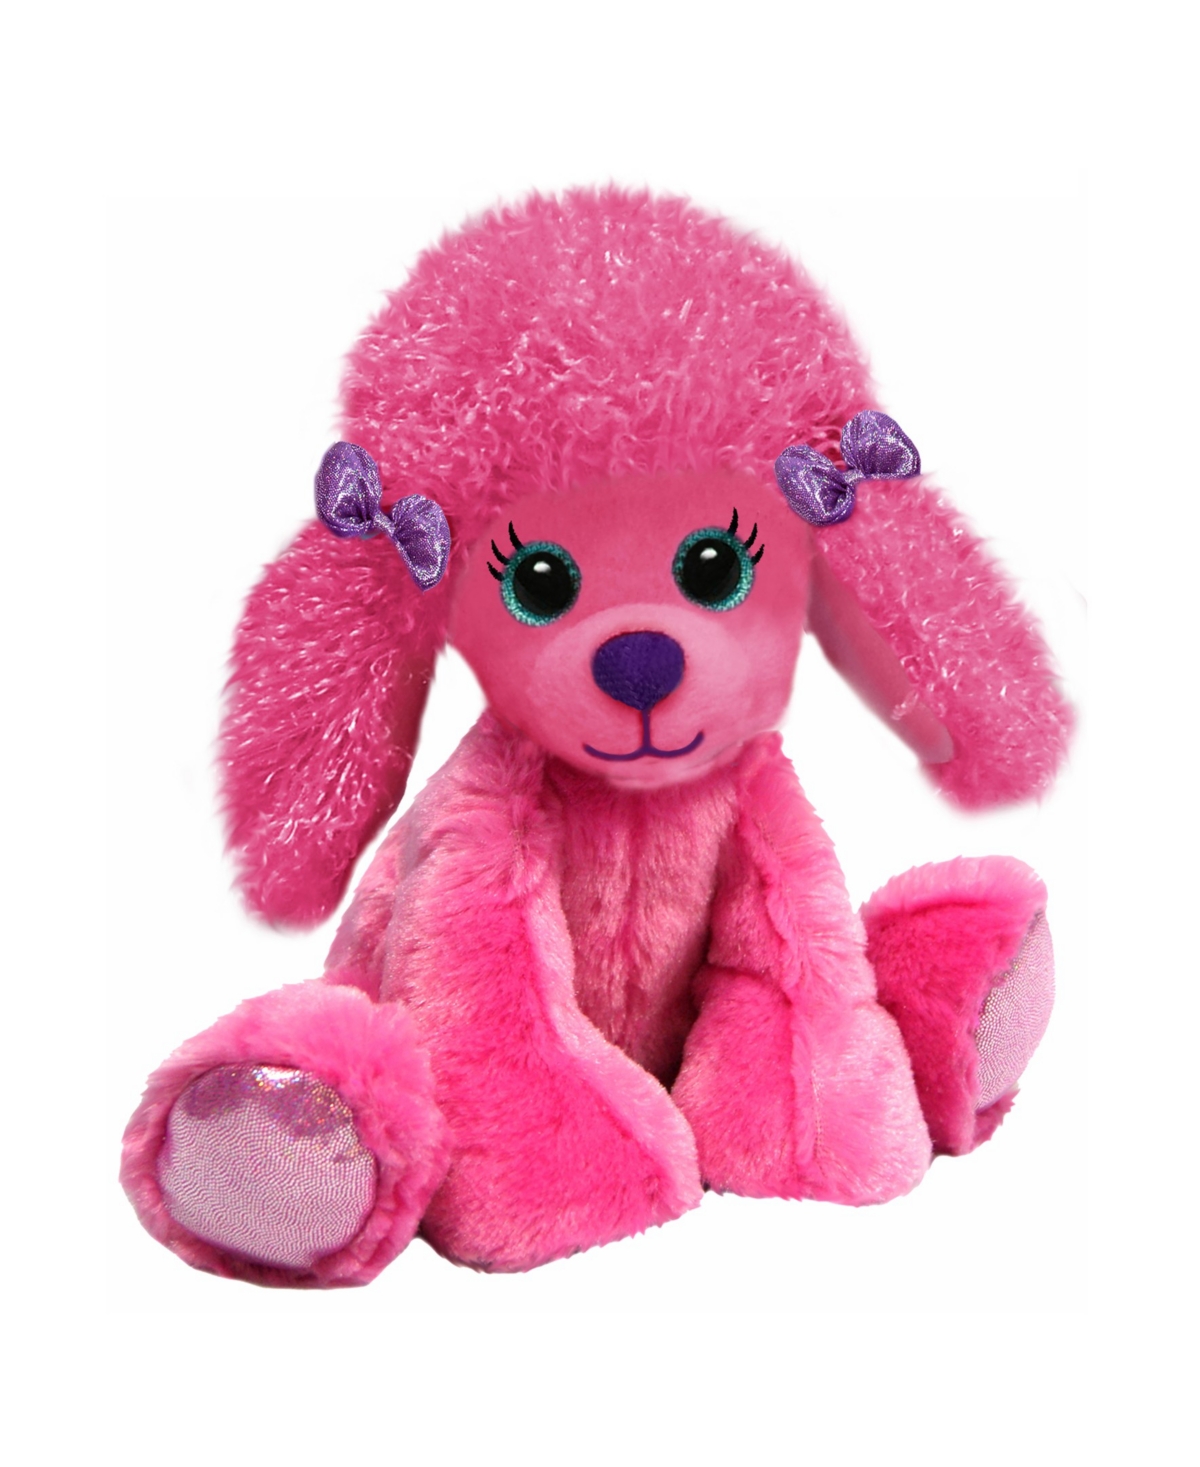 First & Main Babies' - 7 Inch Gal Pals Plush, Polly Poodle In Dusty Rose